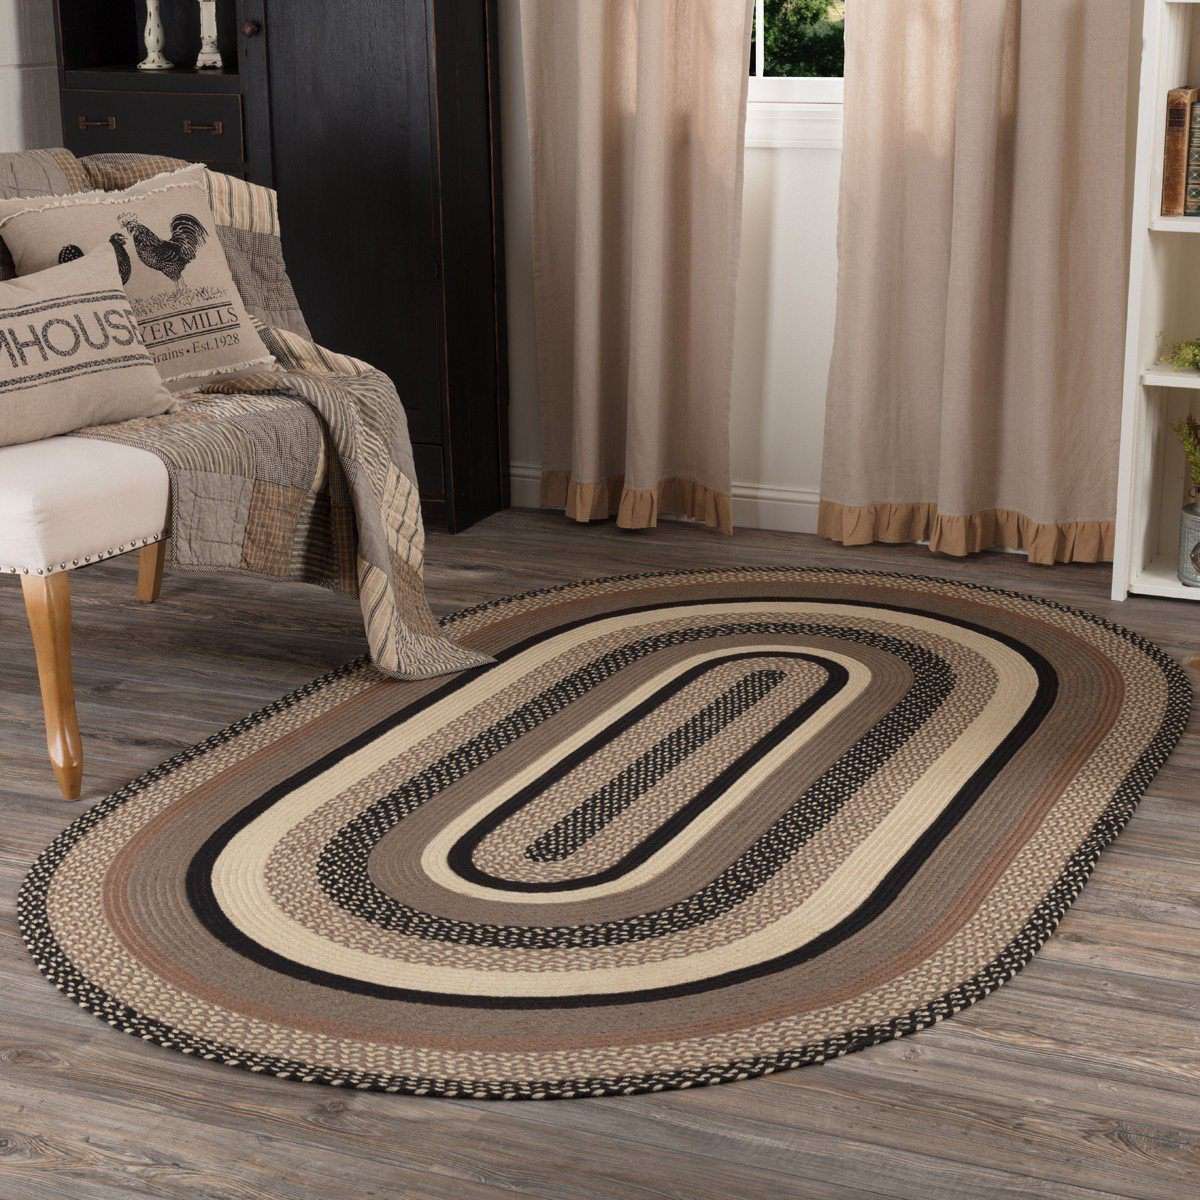 Sawyer Mill Charcoal Jute Braided Oval Rugs VHC Brands Rugs VHC Brands 5'x8' 